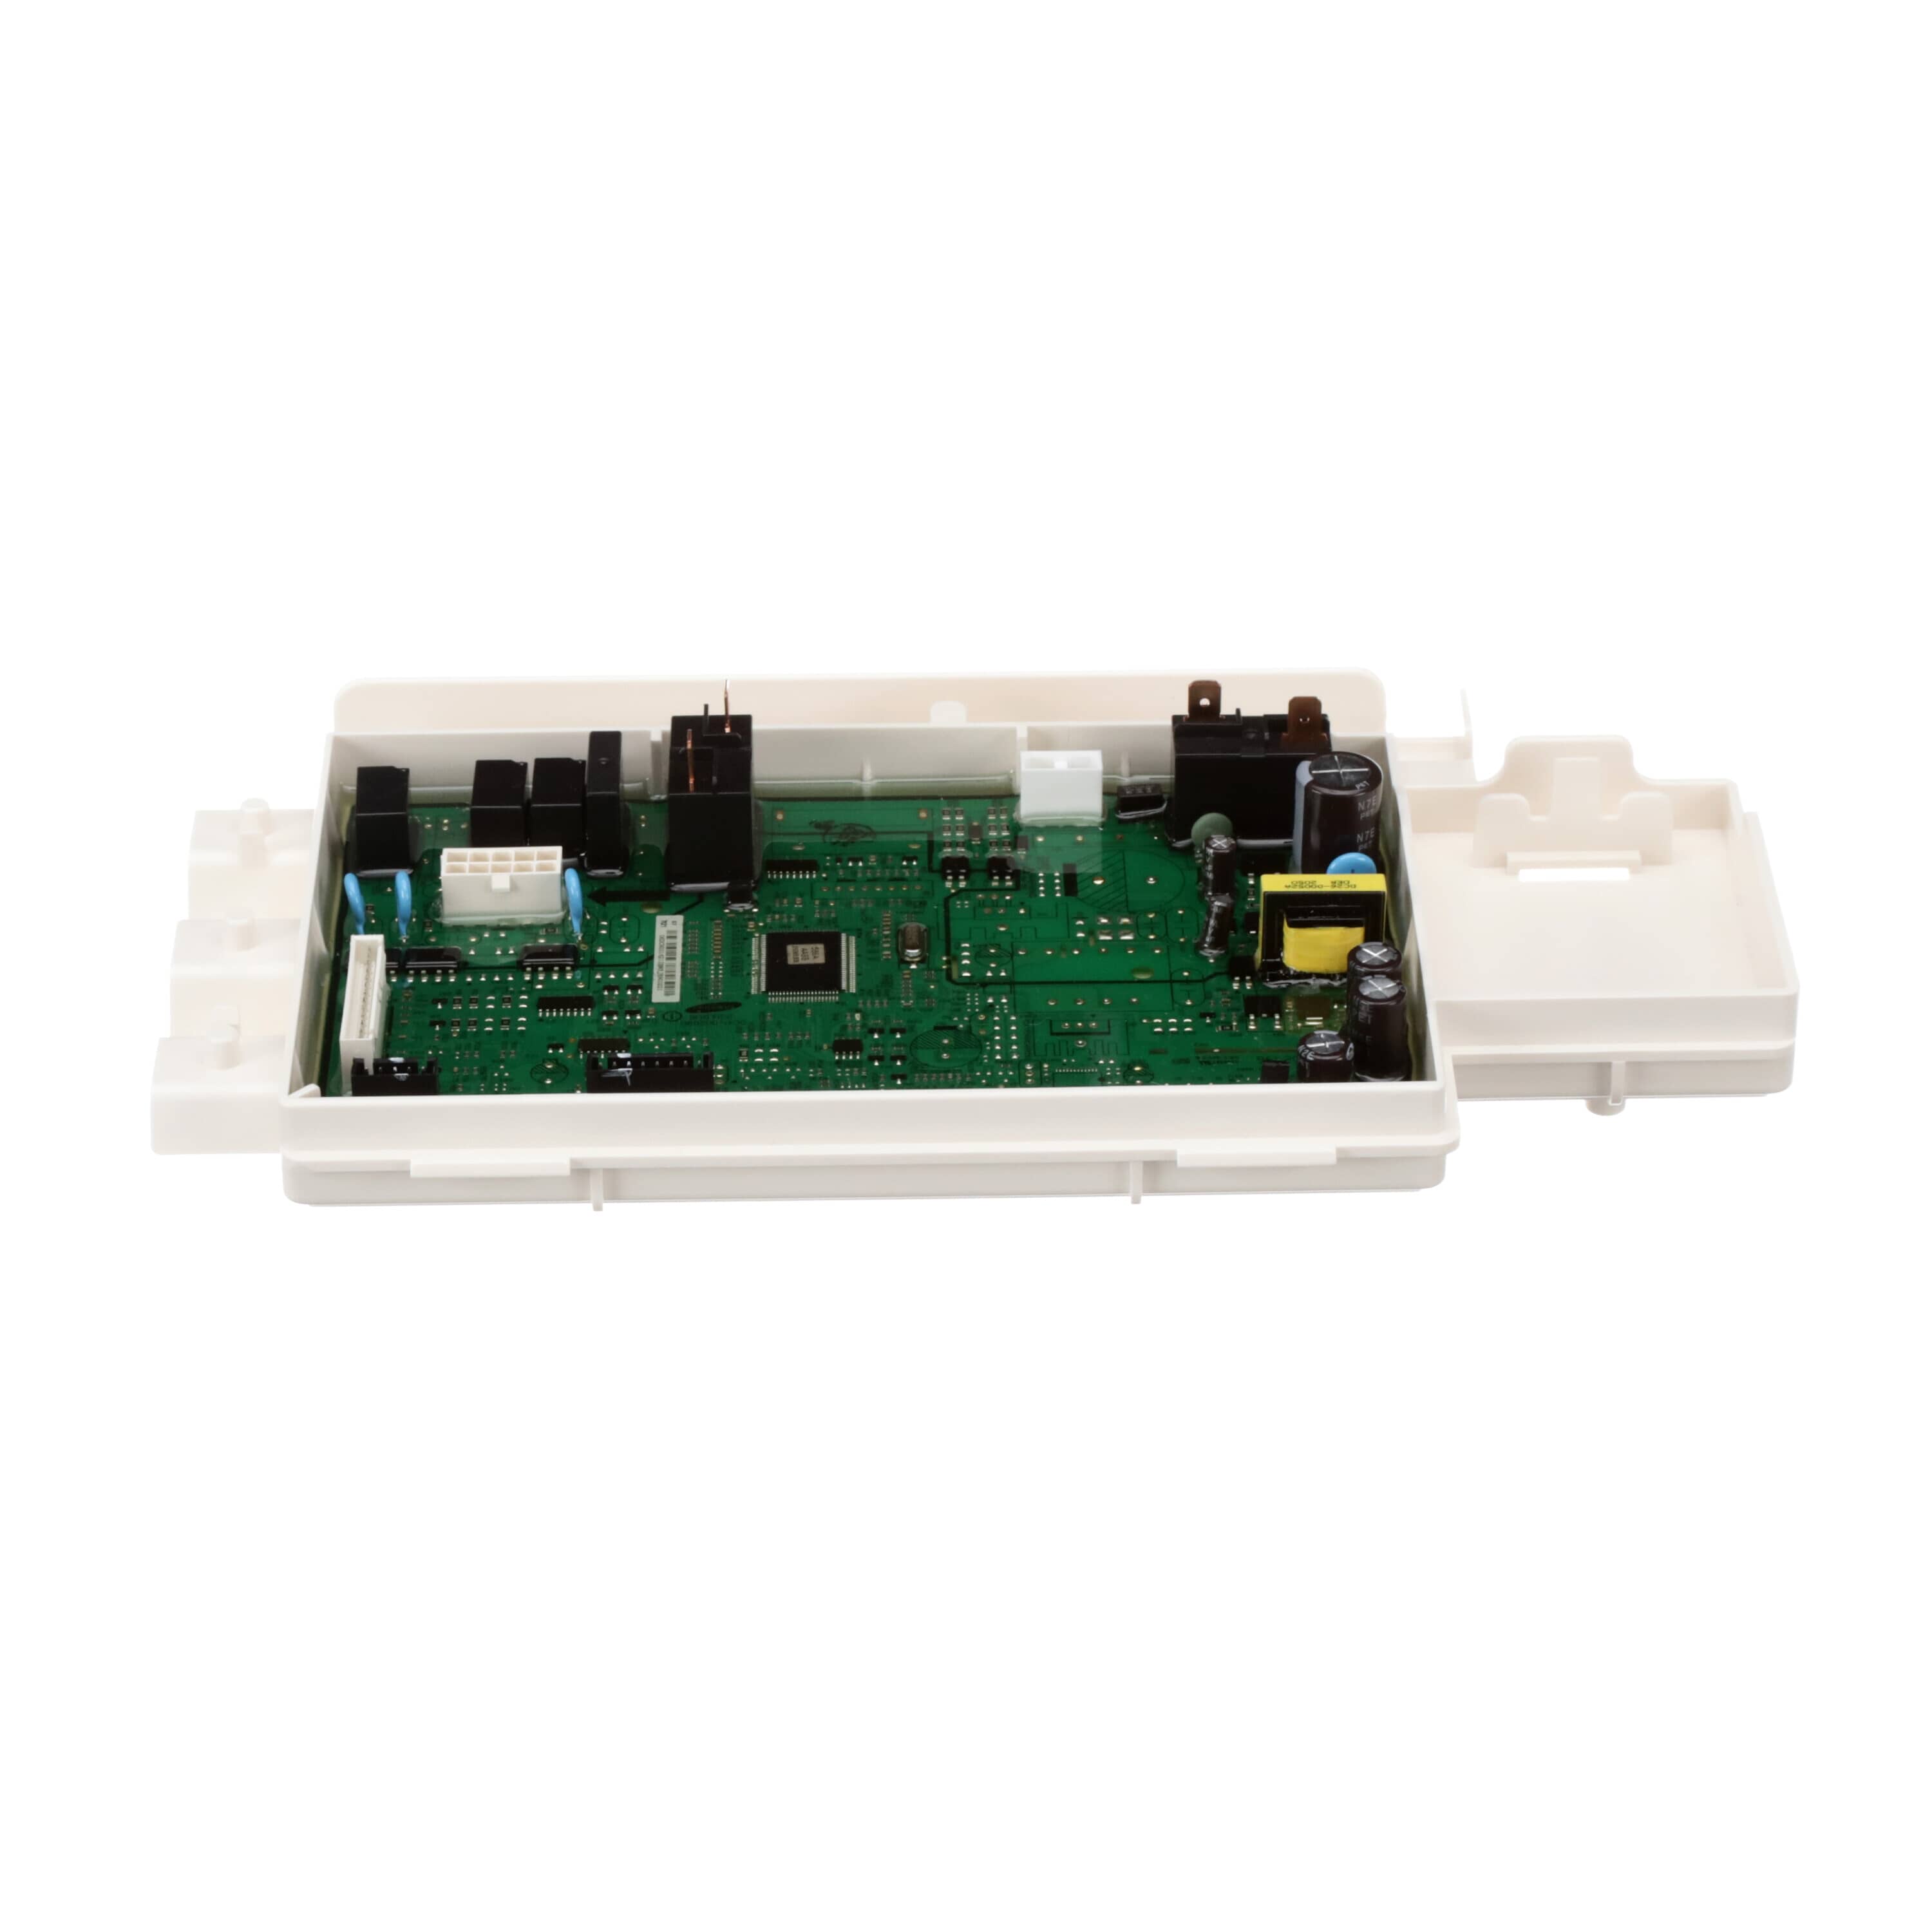 Samsung DC92-01621D Washer Electronic Control Board - Samsung Parts USA